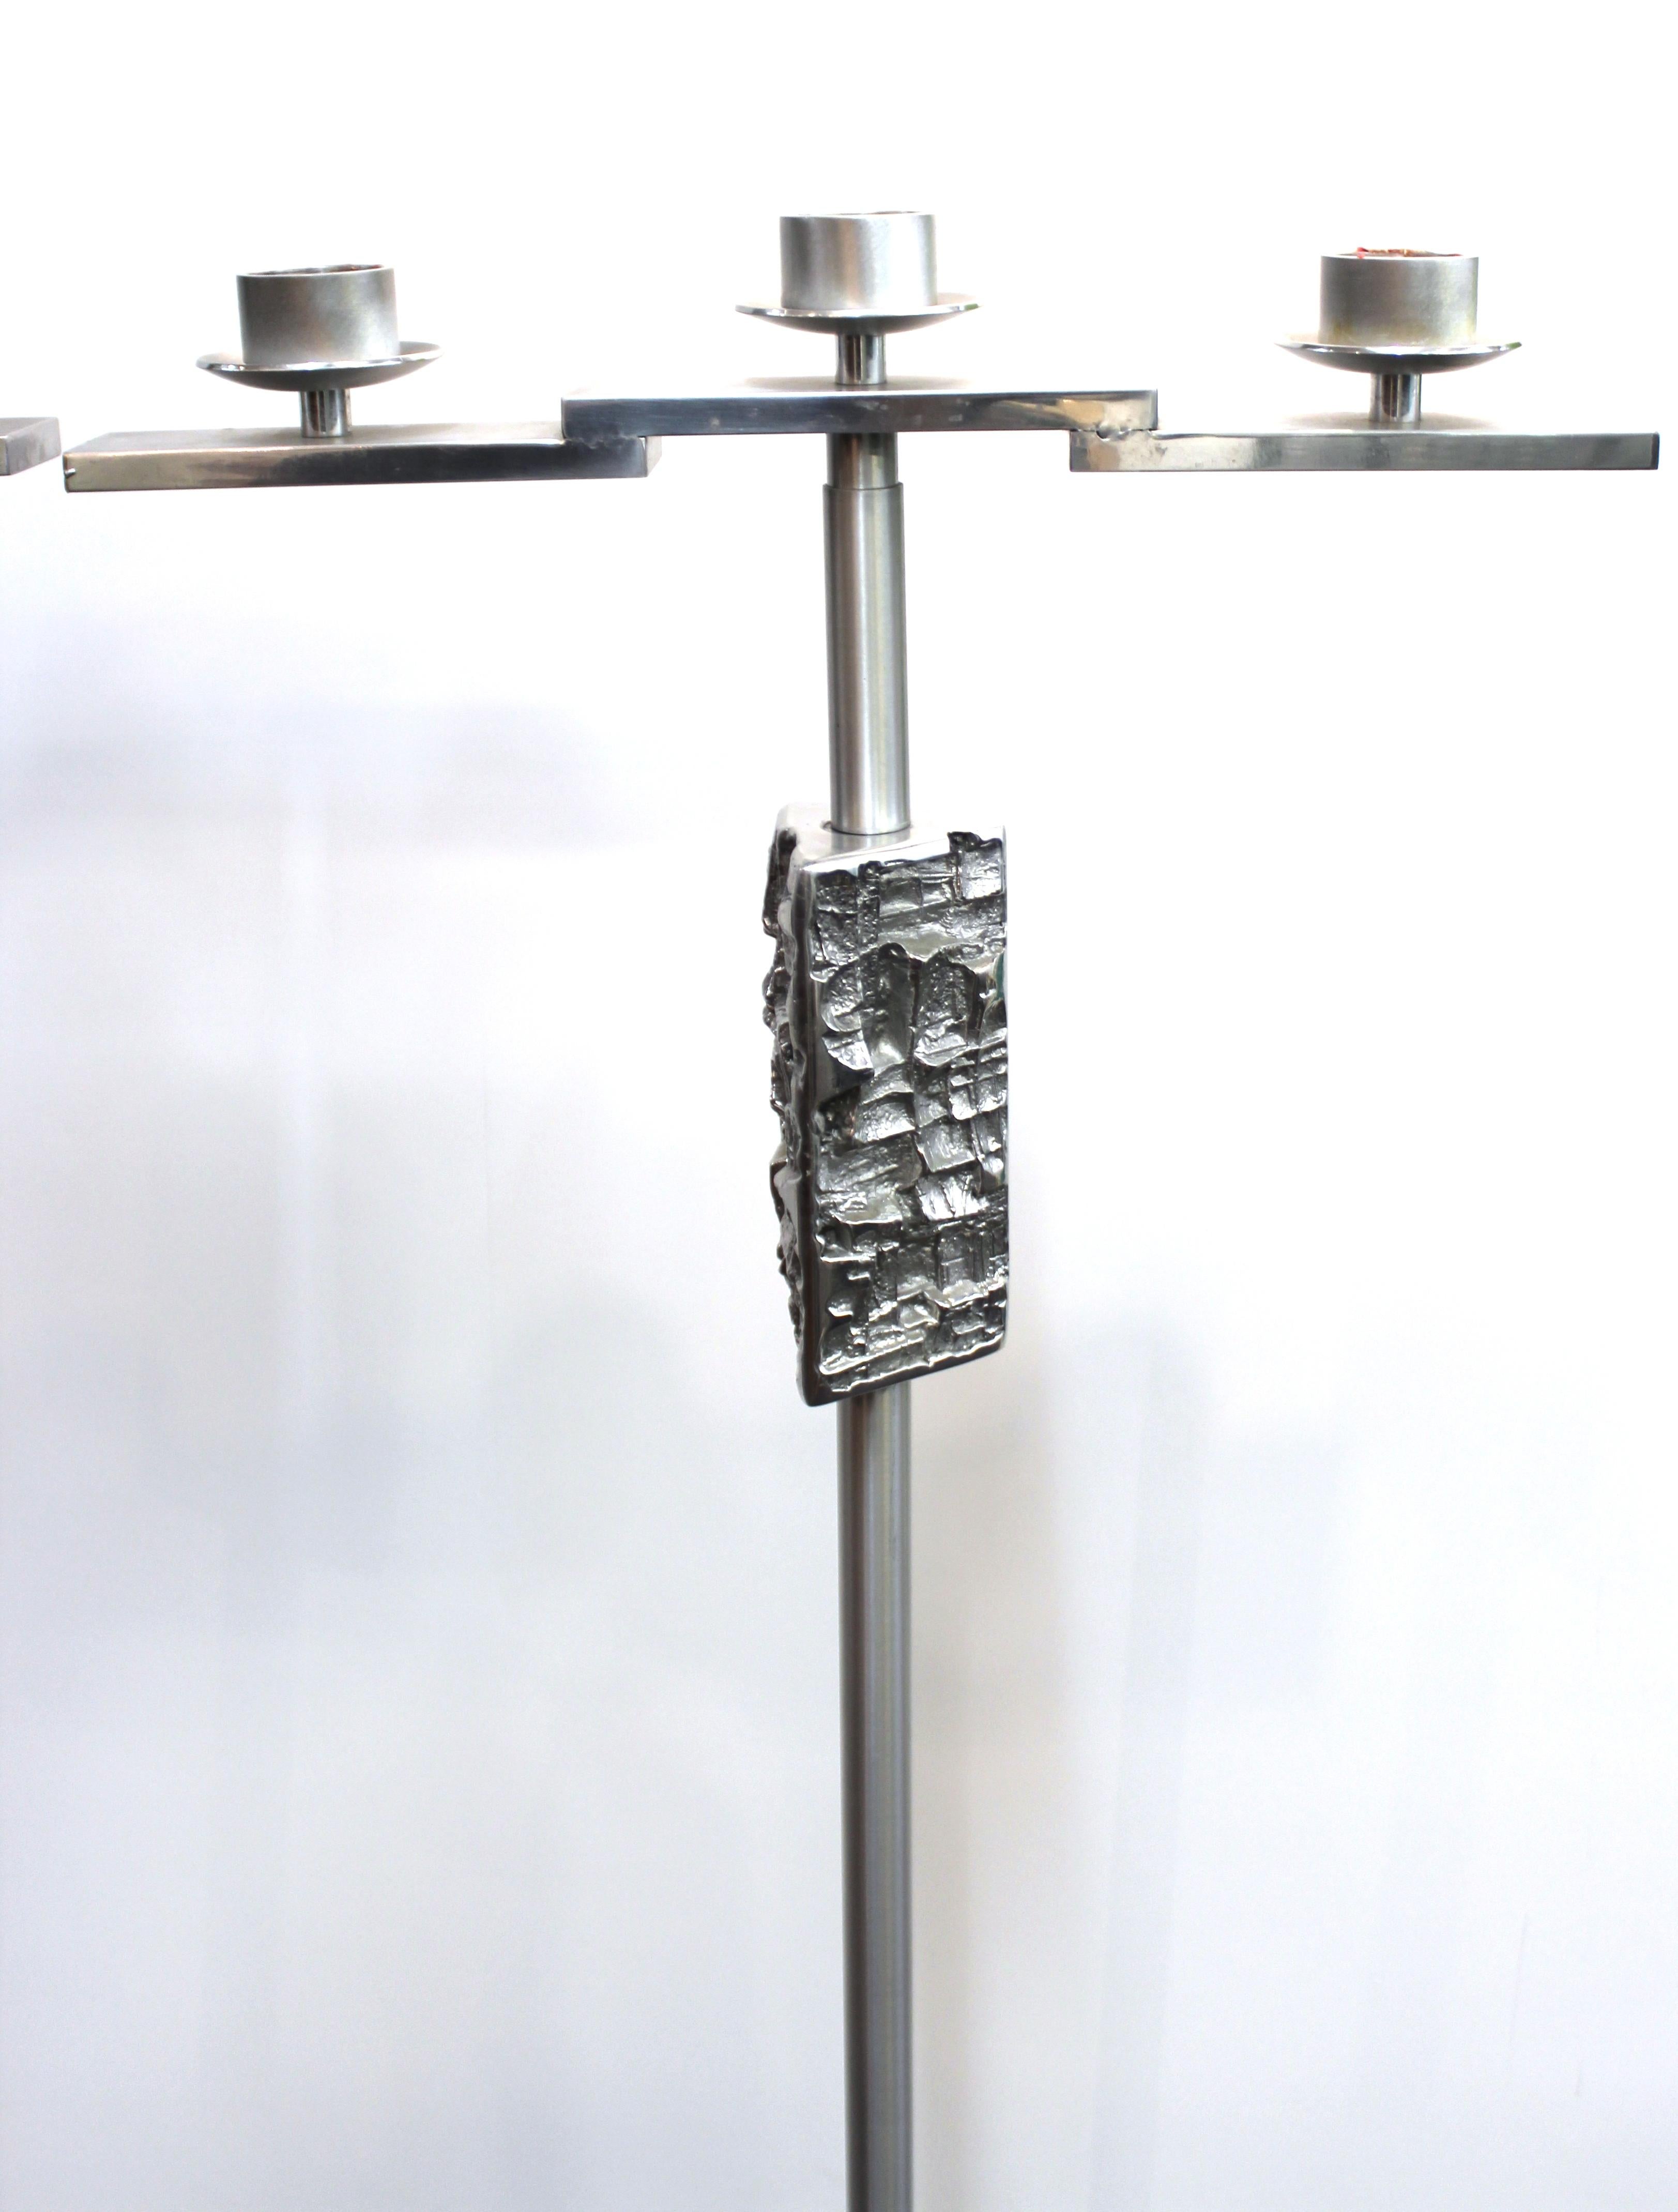 Brutalist modern set of two monumental candelabras, each able to hold three large candles. The pieces feature a Brutalist metal sculpted design on the upper body neck. In great vintage condition with some age-appropriate wear and scratches to the